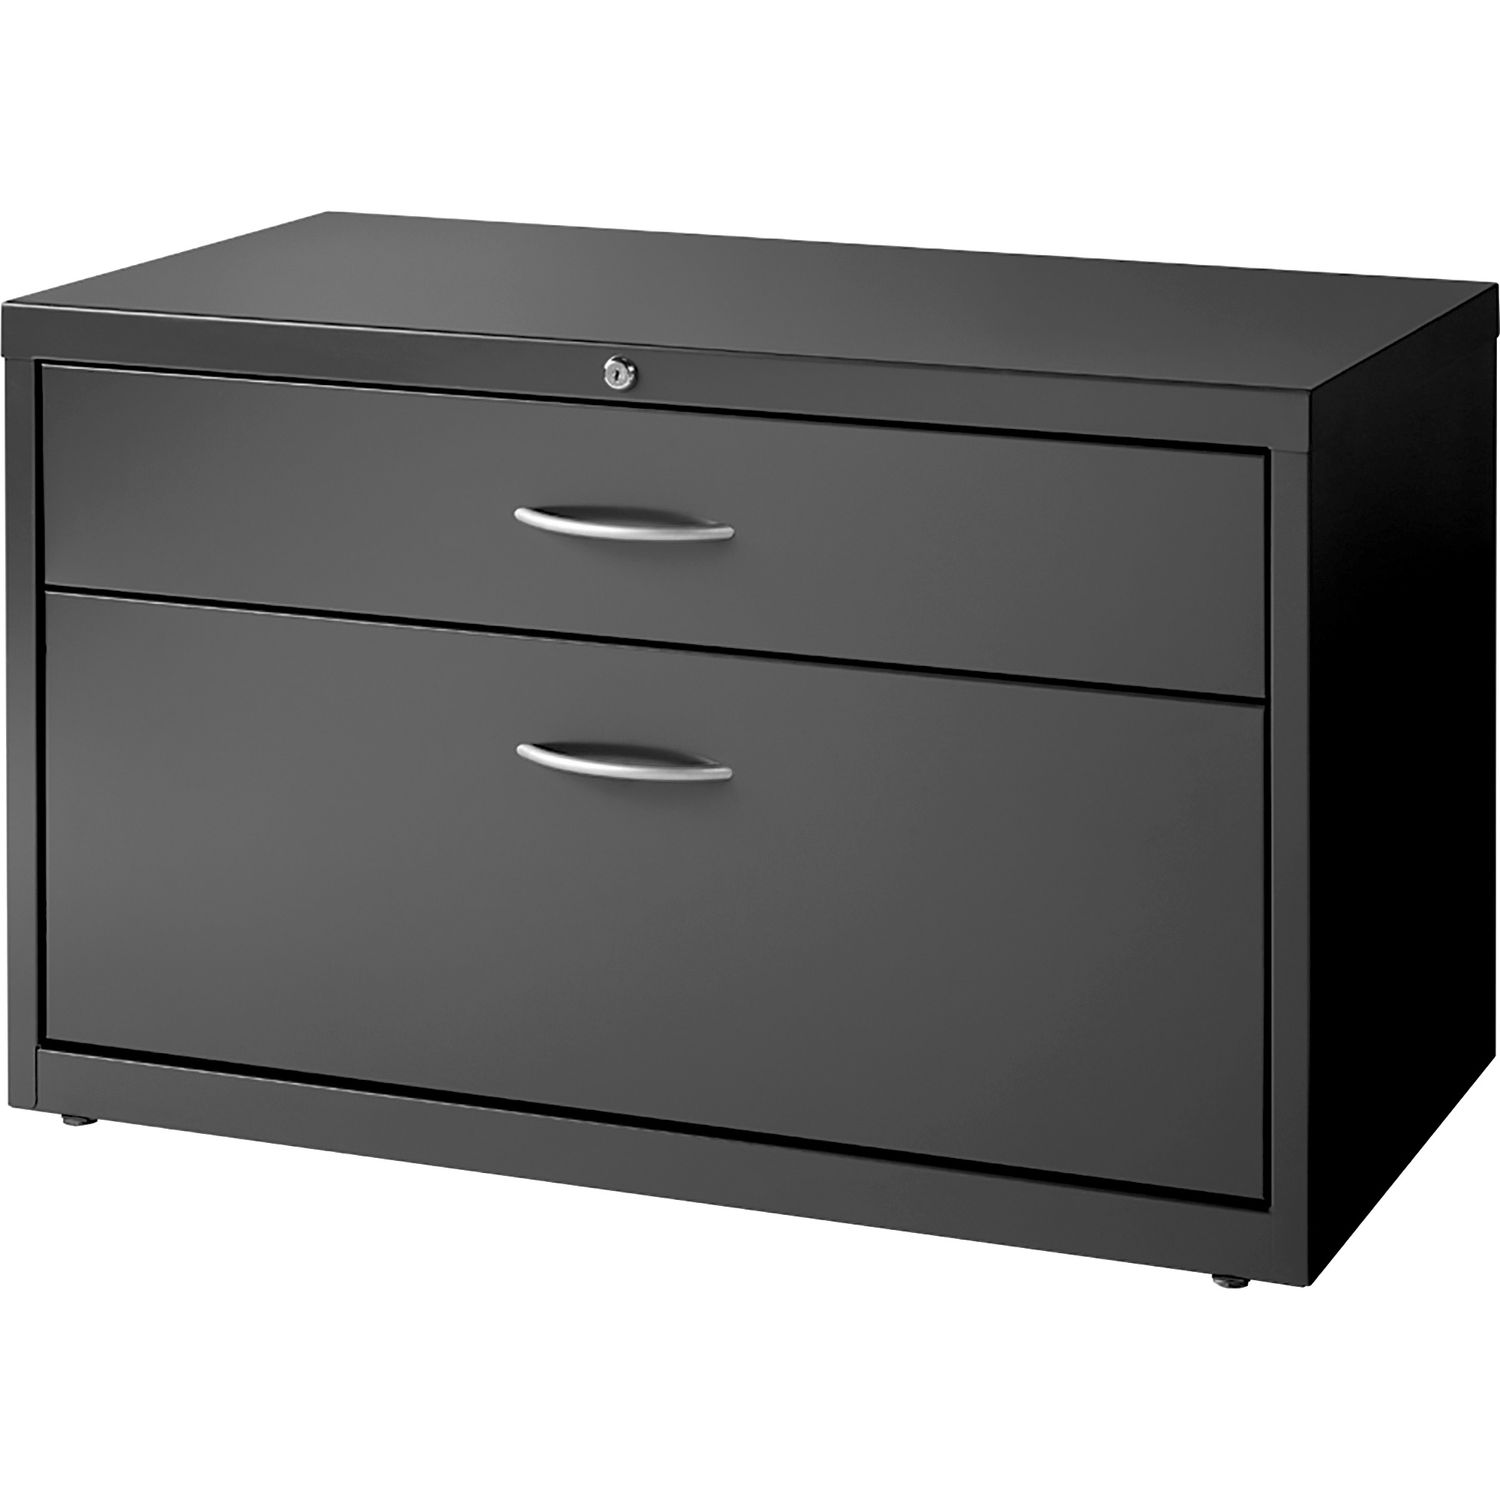 WorkPro Two-Drawer Lateral Credenza 36" x 18.6" x 22", 2 x File Drawer(s), Finish: Charcoal Gray